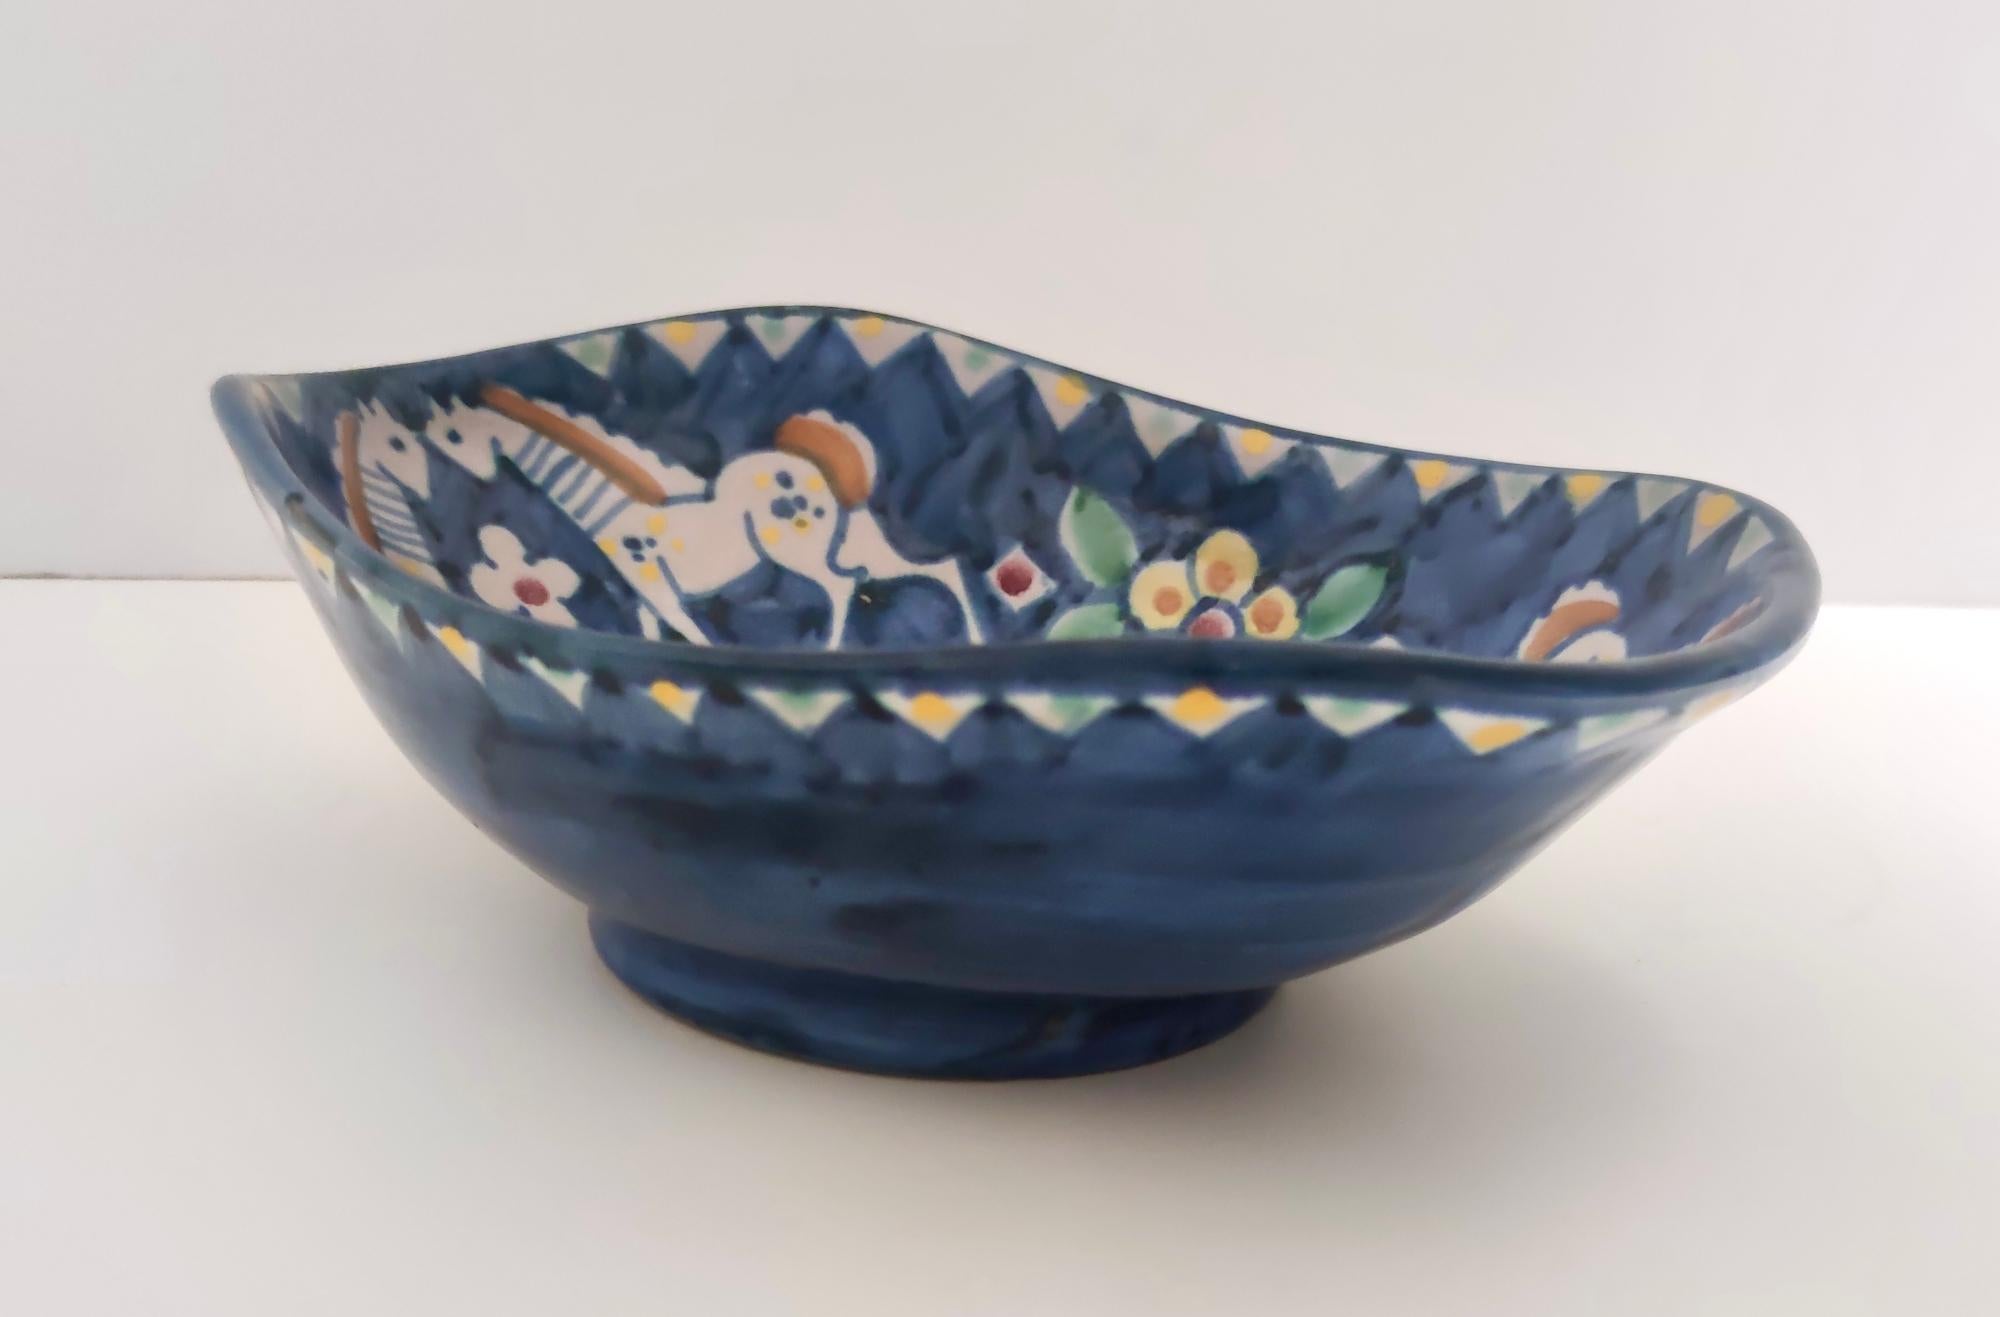 Vintage Handmade and Hand Painted Ceramic Bowl or Centerpiece, Italy In Excellent Condition For Sale In Bresso, Lombardy